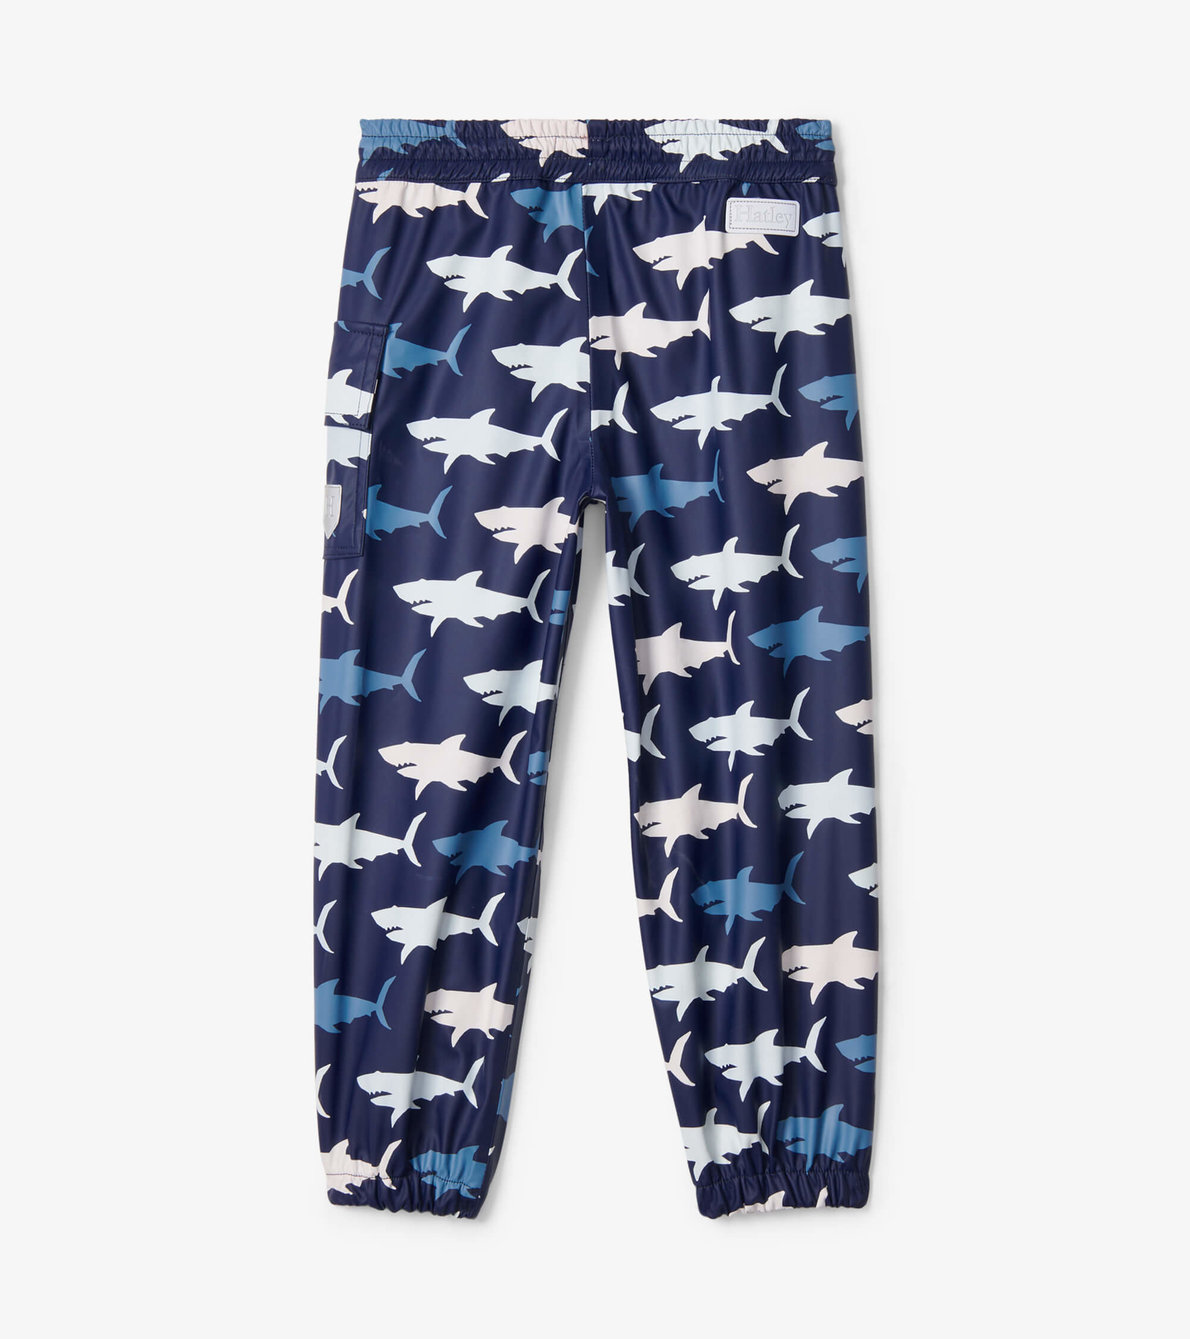 View larger image of Hungry Sharks Colour Changing Kids Rain Pants